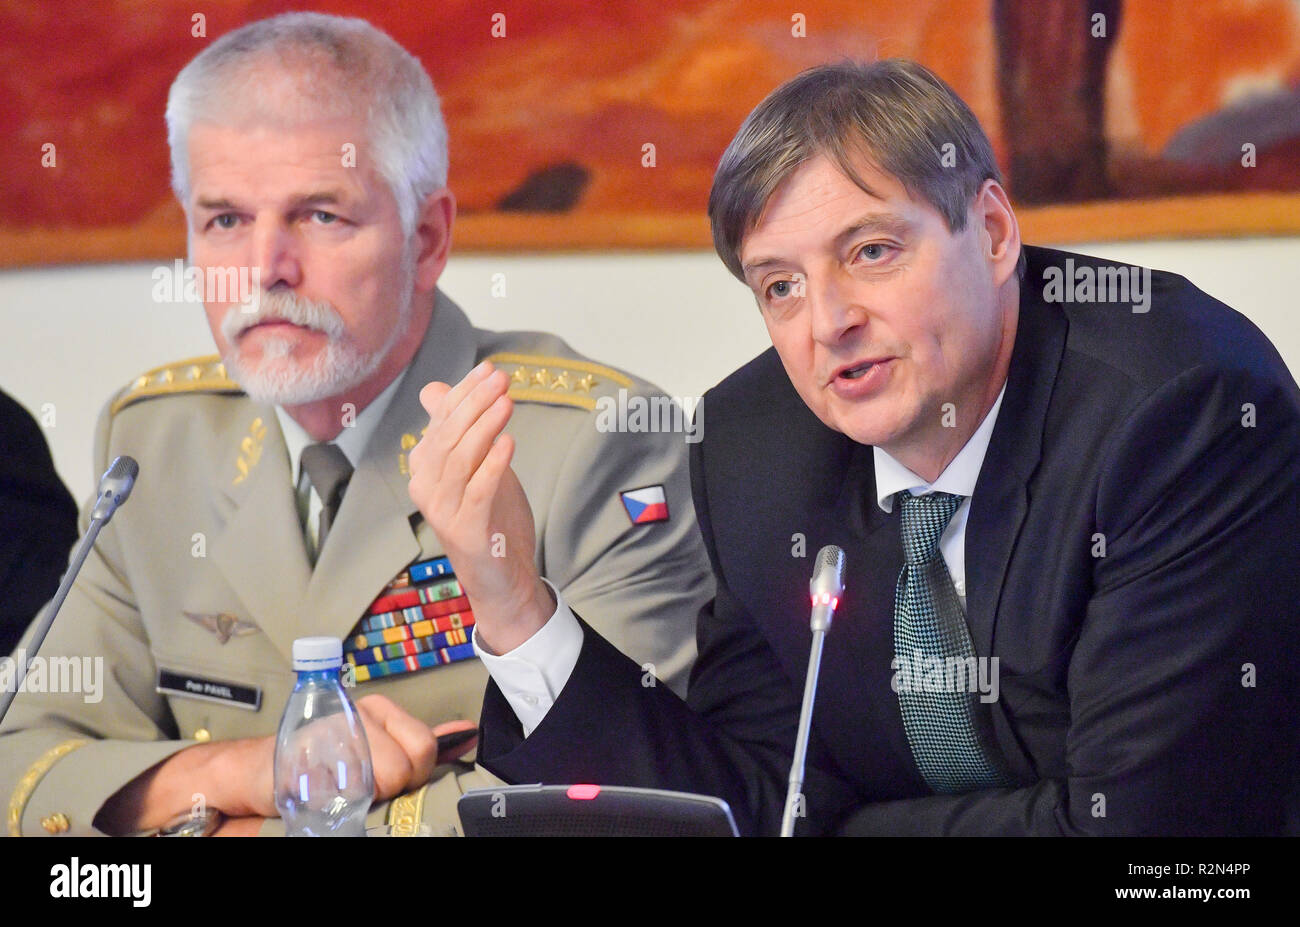 Prague, Czech Republic. 20th Nov, 2018. L-R former NATO military committee chief Petr Pavel and Deputy Director of the NATO Public Diplomacy Division Petr Lunak attend the international conference on current security risks, in Prague, Czech Republic, on November 20, 2018. Credit: Vit Simanek/CTK Photo/Alamy Live News Stock Photo